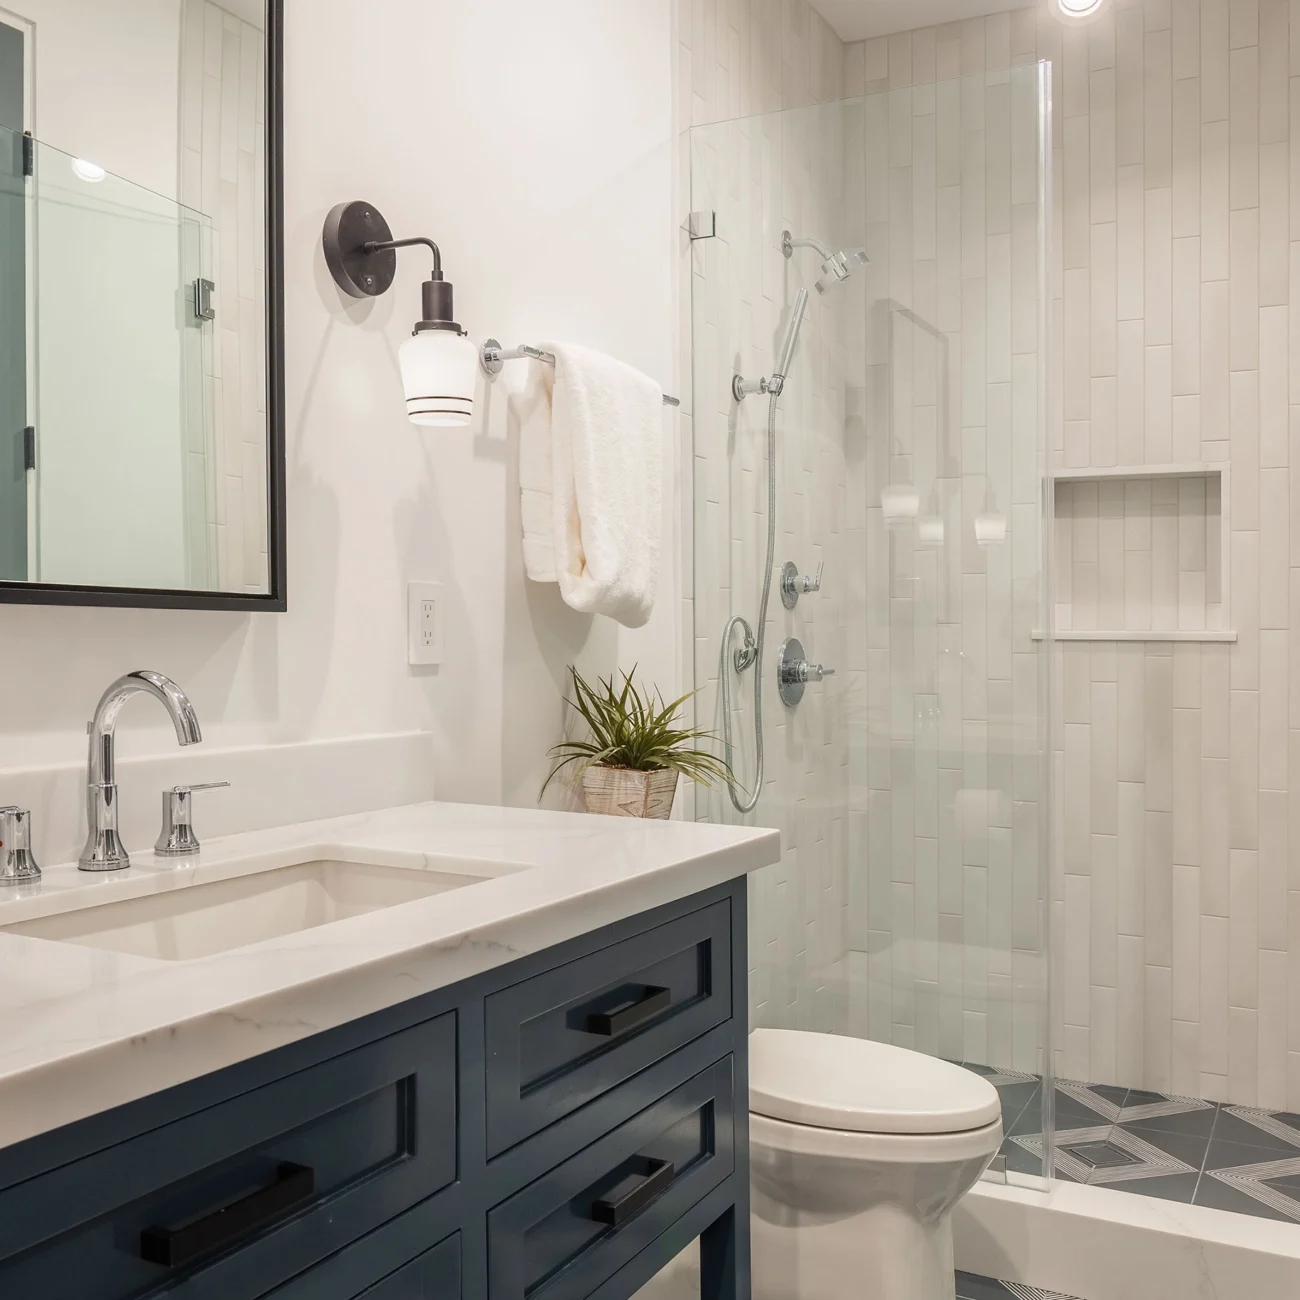 Christine Vroom Interiors | 36th | Costal bathroom with blue/green vanity and glass shower